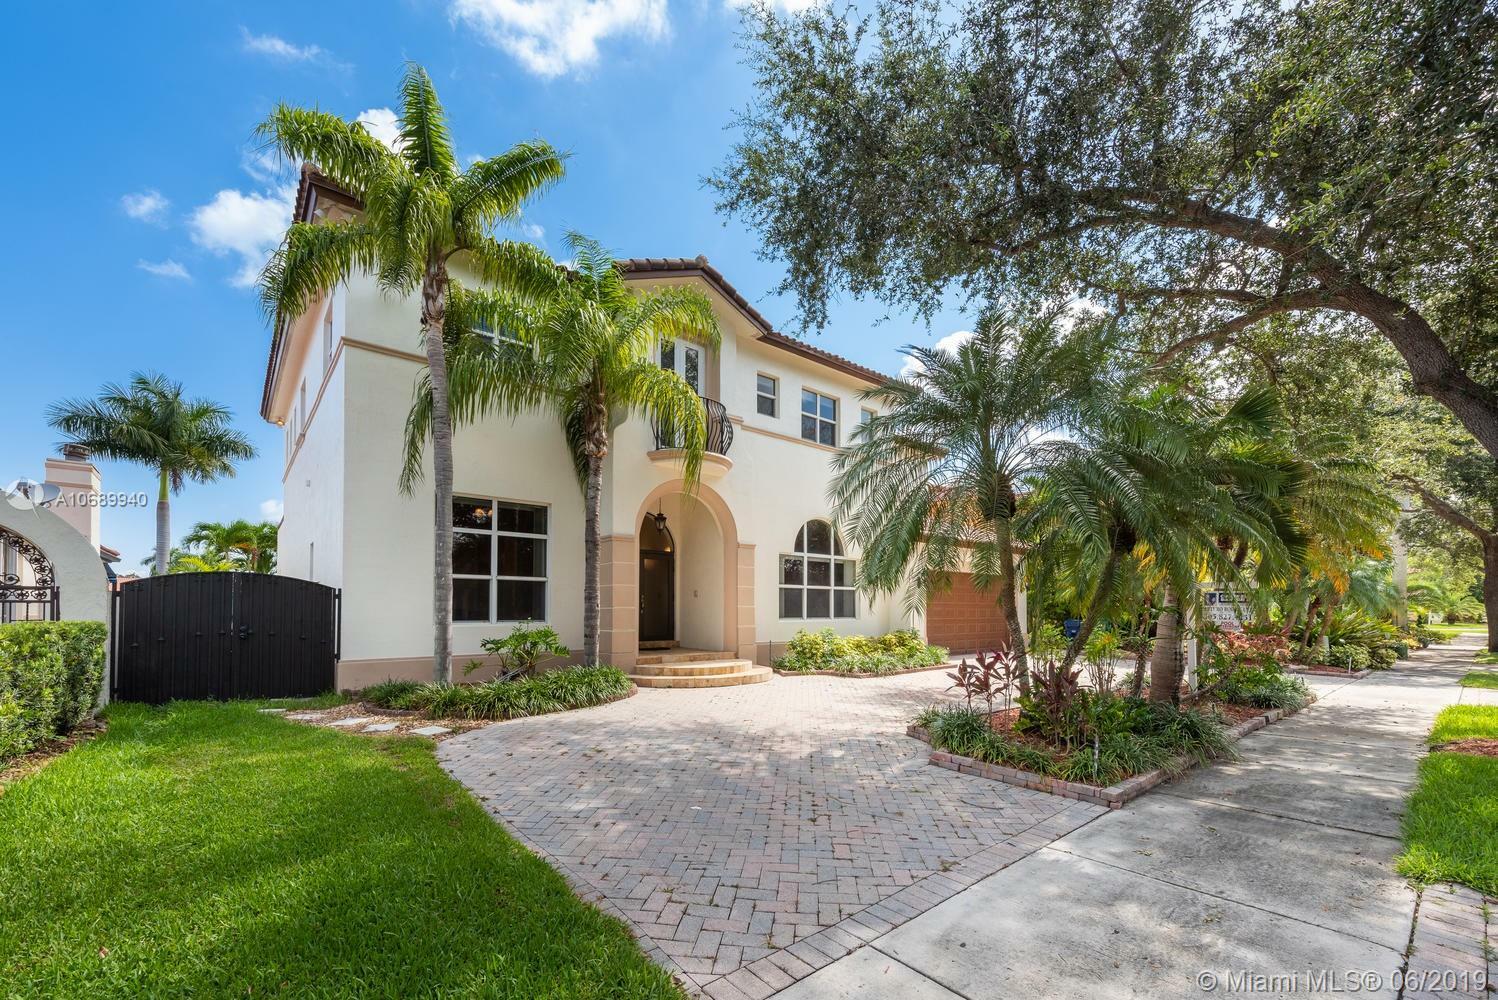 Property Photo:  8465 NW 166th Ter  FL 33016 